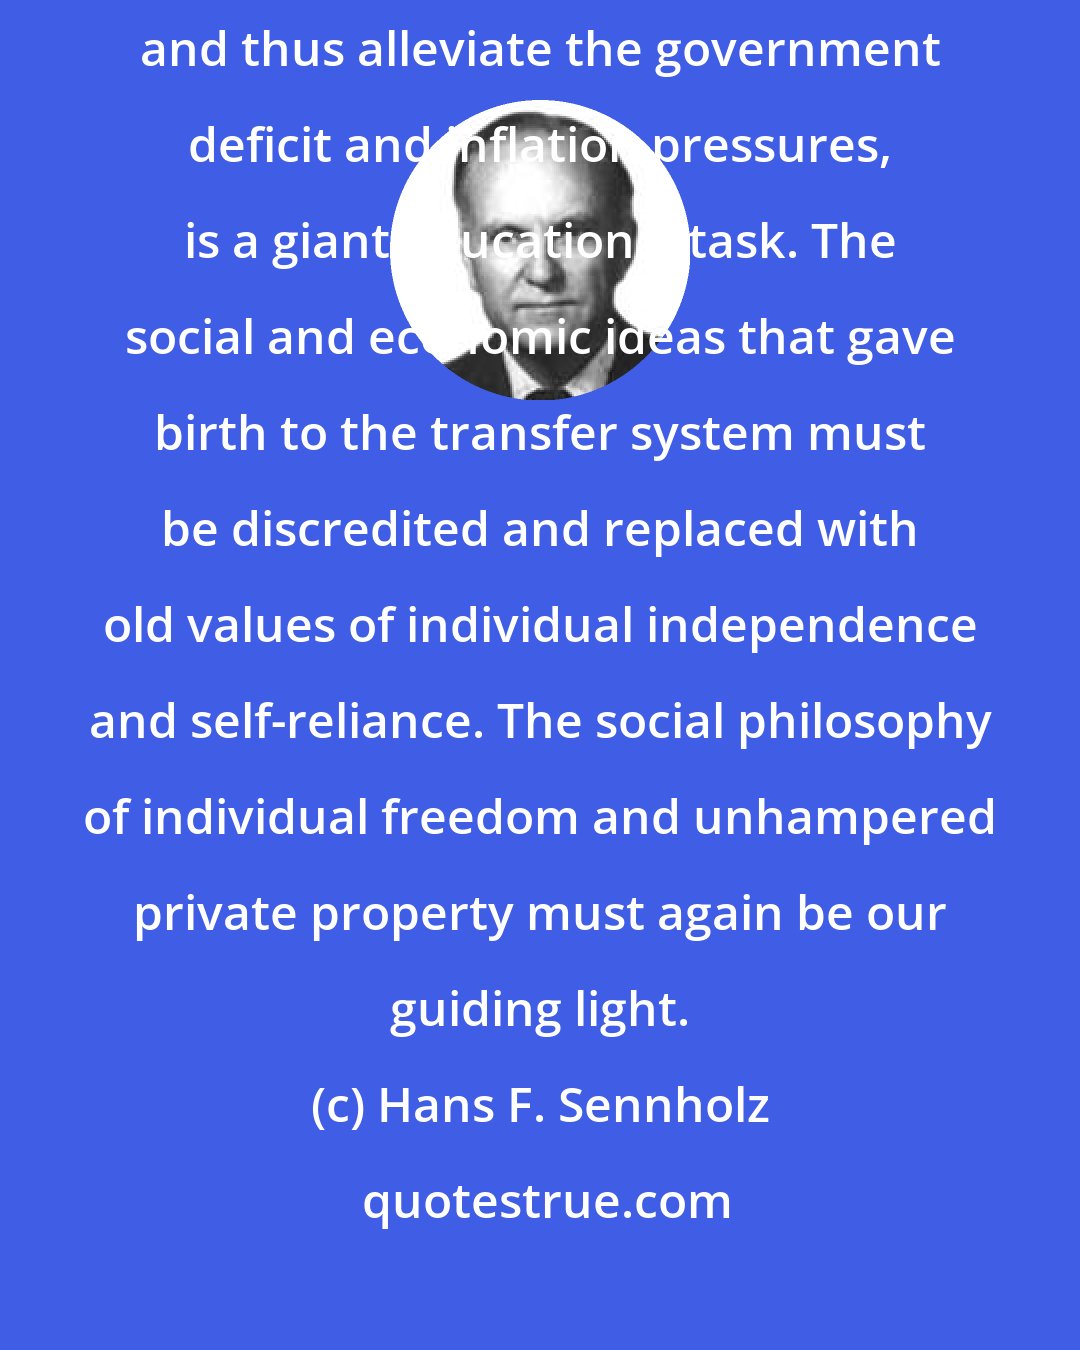 Hans F. Sennholz: To reverse the trend and reduce the role of government in our lives, and thus alleviate the government deficit and inflation pressures, is a giant educational task. The social and economic ideas that gave birth to the transfer system must be discredited and replaced with old values of individual independence and self-reliance. The social philosophy of individual freedom and unhampered private property must again be our guiding light.